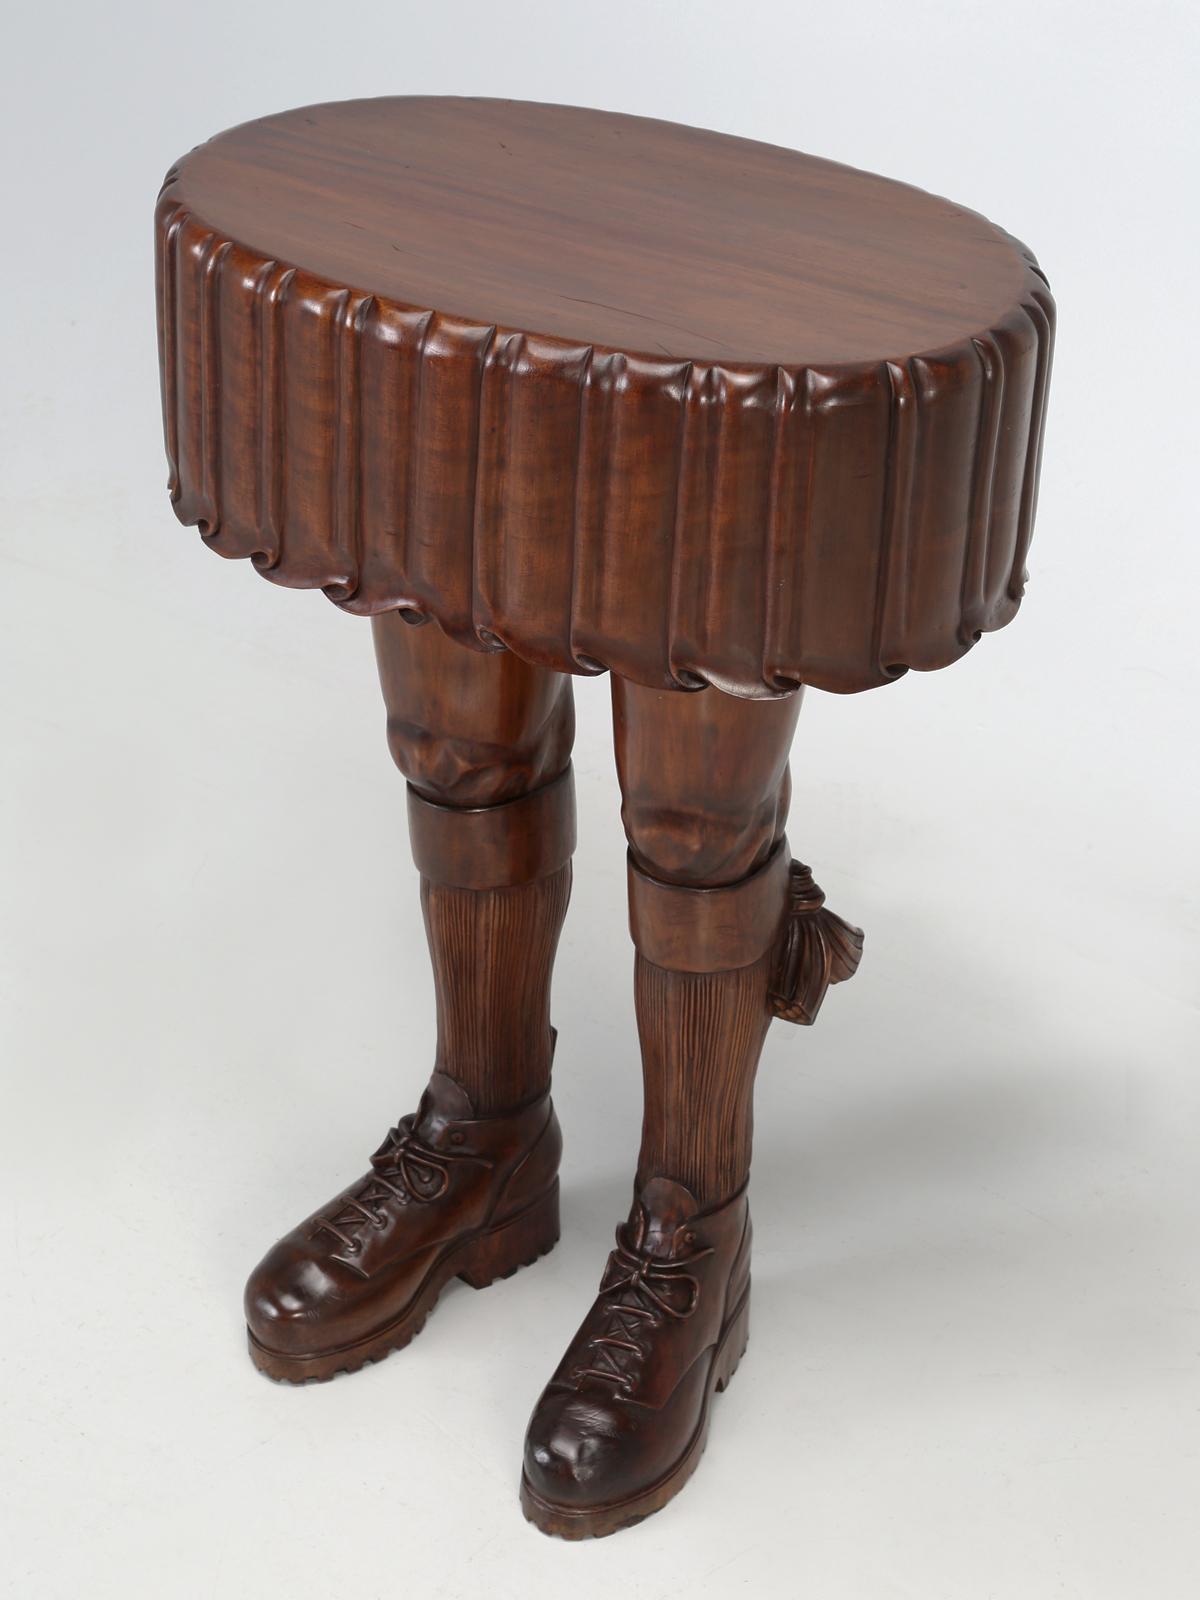 Not completely sure, if I would call this end table or side table, Folk Art, or exactly how I would describe it? Clearly, whomever carved this mahogany side table, was a master wood carver and that becomes quite apparent, when you take a hard look